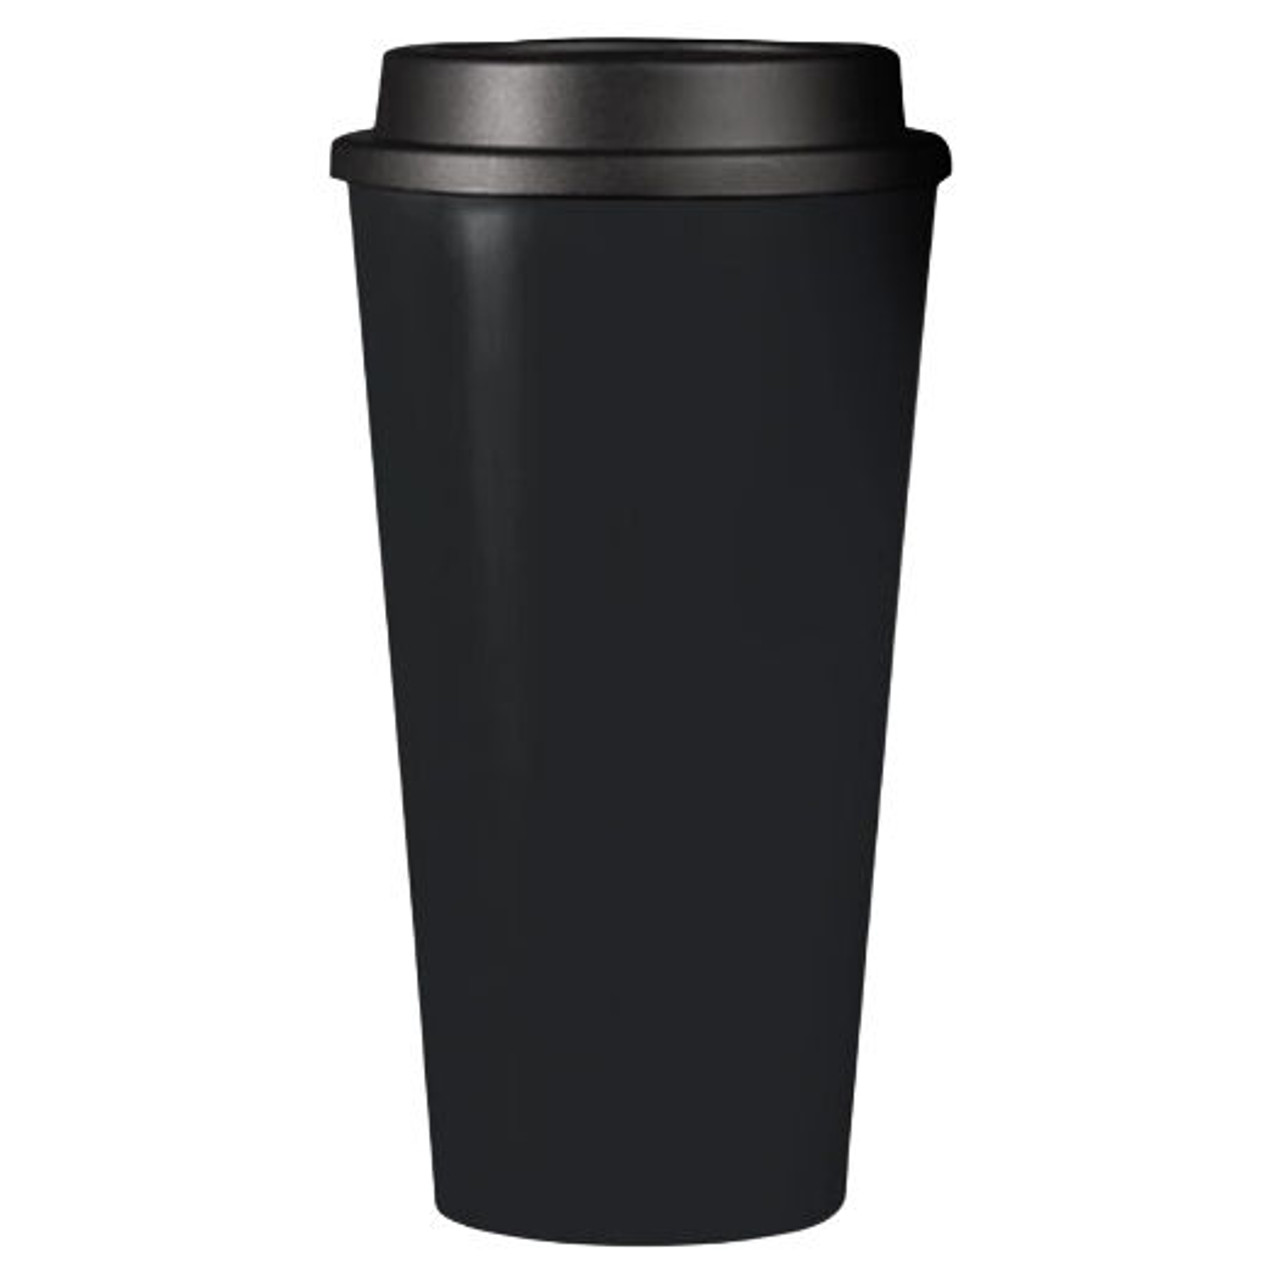 16oz Polypropylene ALL BLACK RE-USABLE Hot Cup and Lid Each